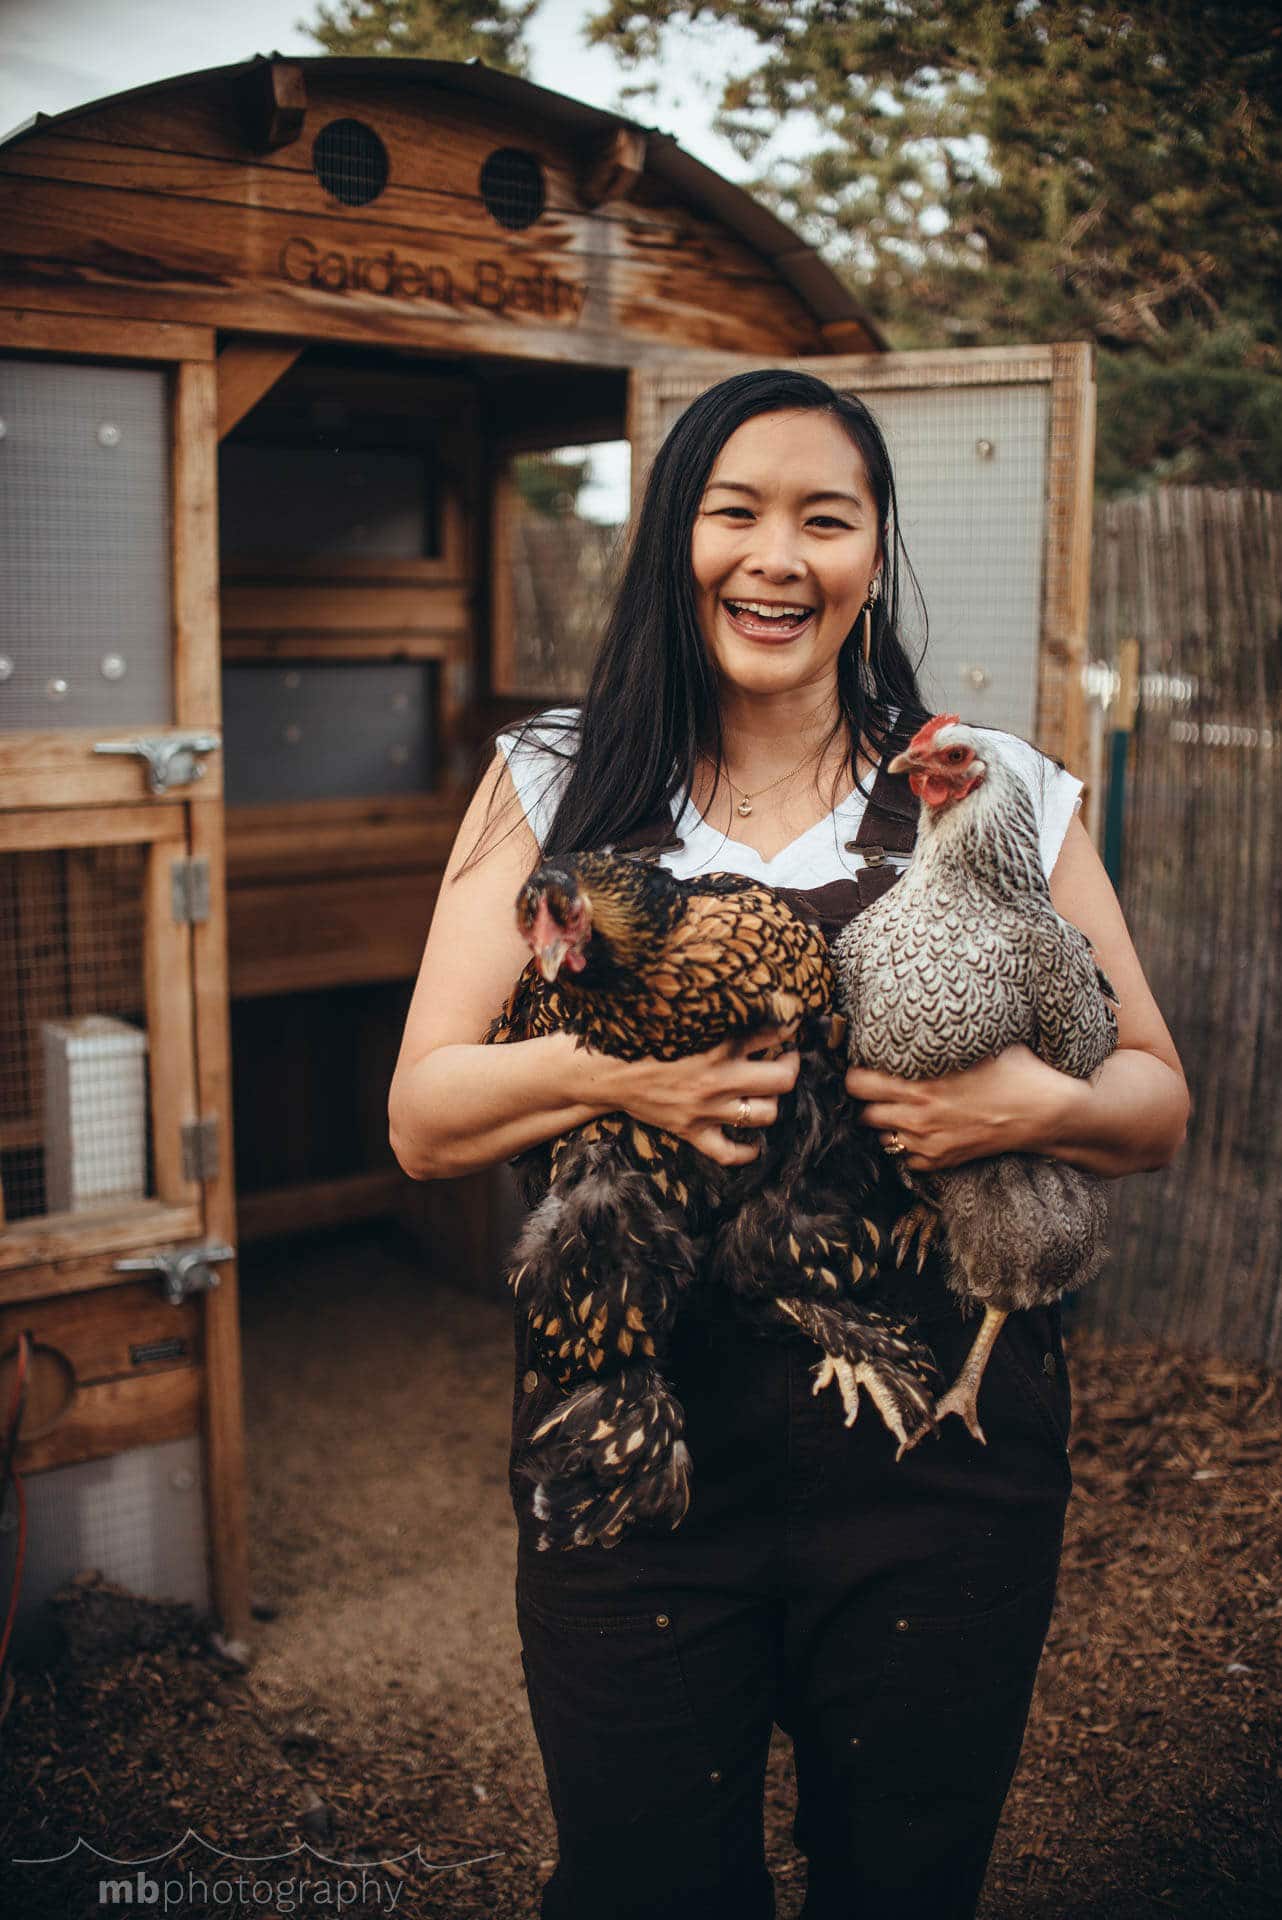 Garden Betty holding two chickens in front of their coop